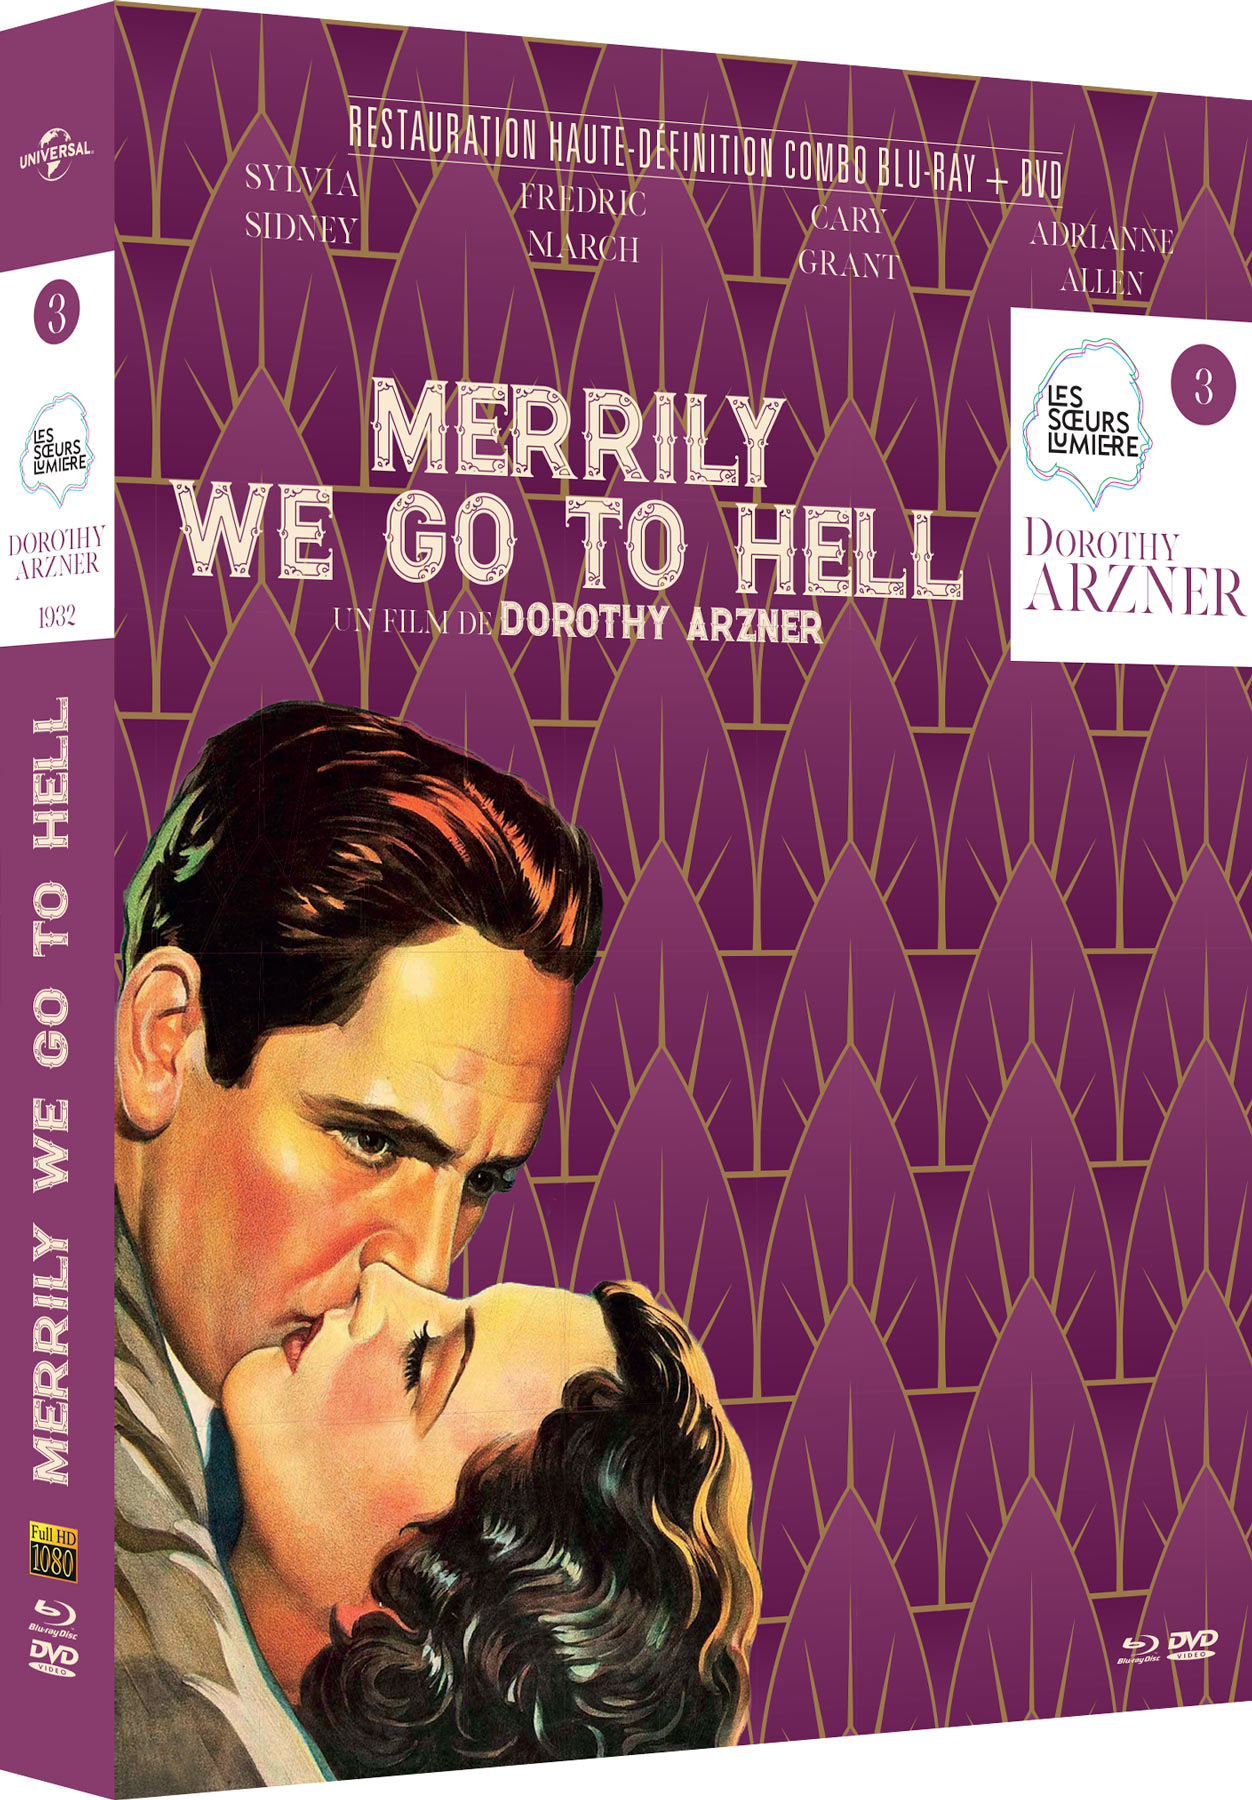 Merrily We Go To Hell - Combo Blu-ray + DVD